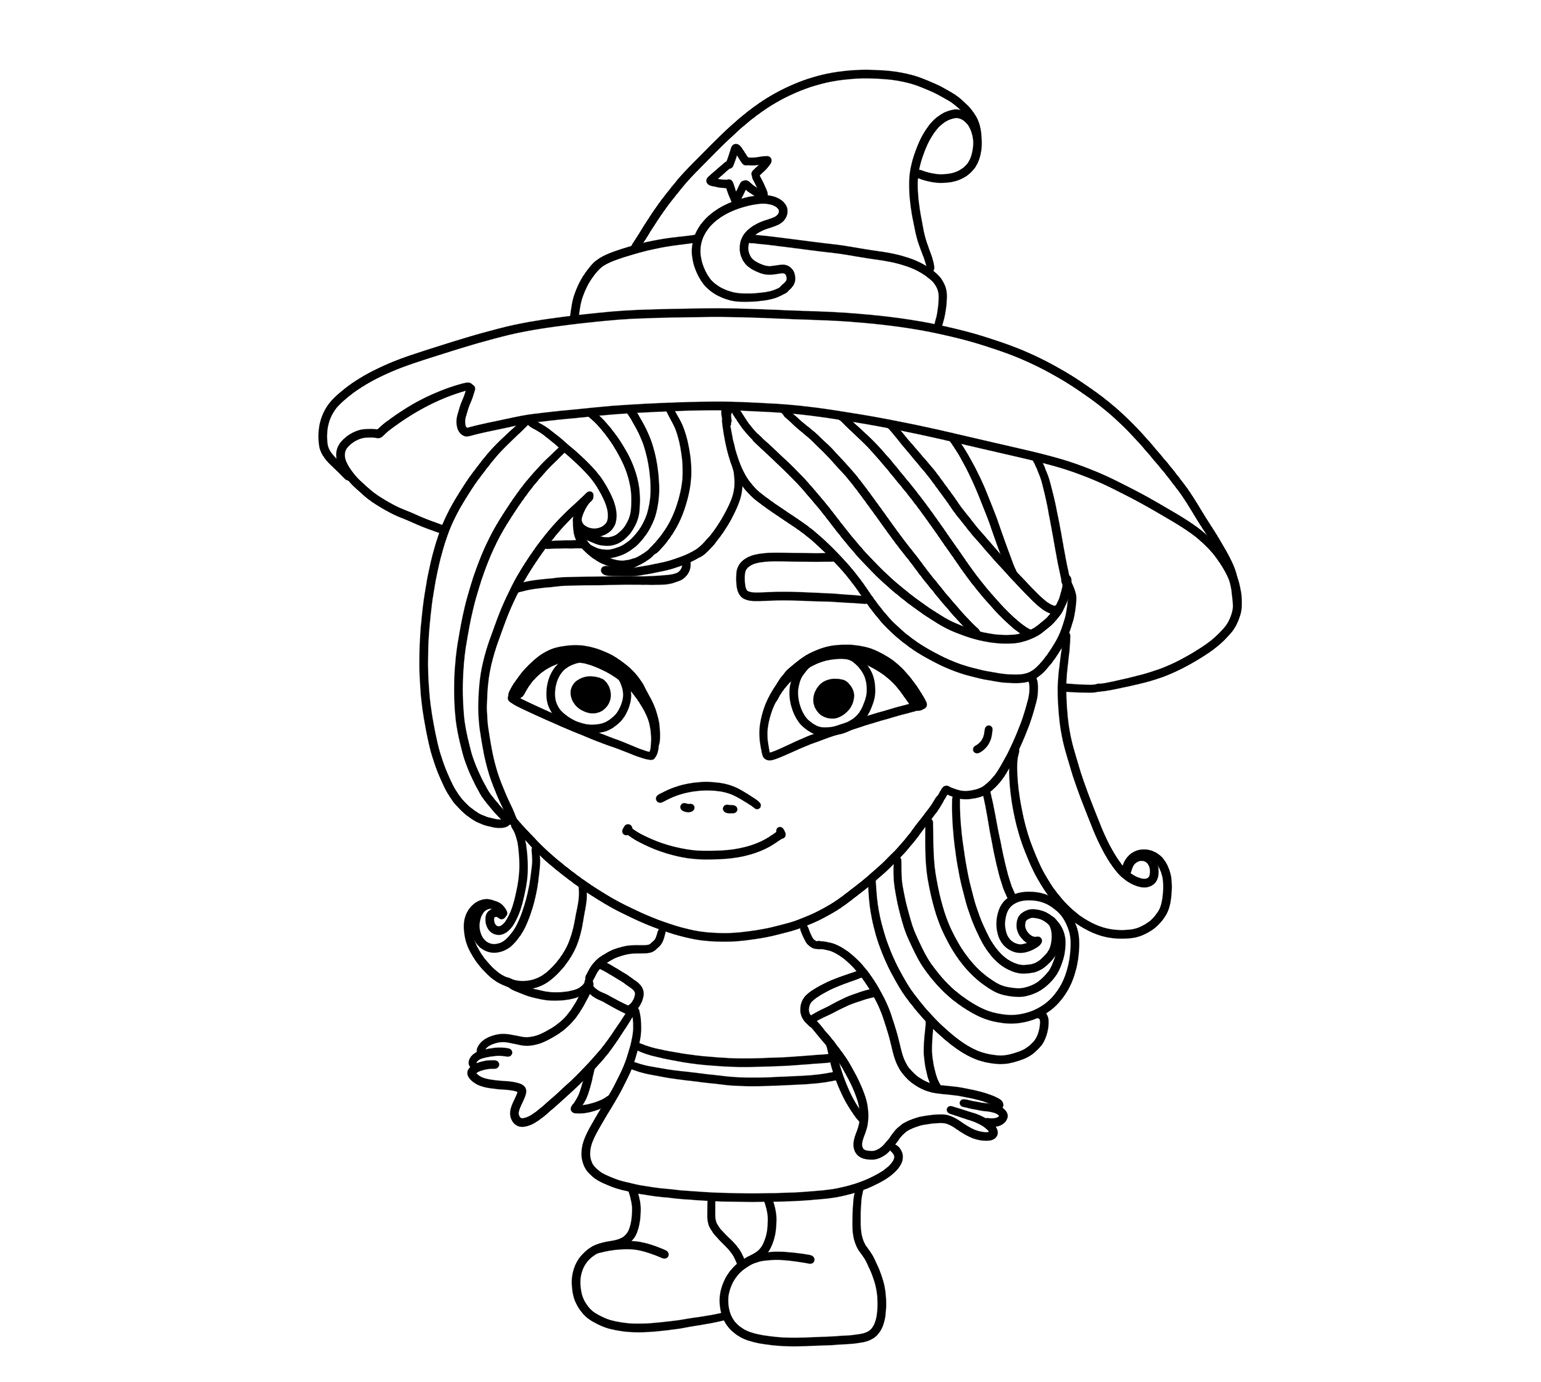 Super monsters coloring pages free | Monster coloring pages, Pumpkin coloring  pages, Free kids coloring pages